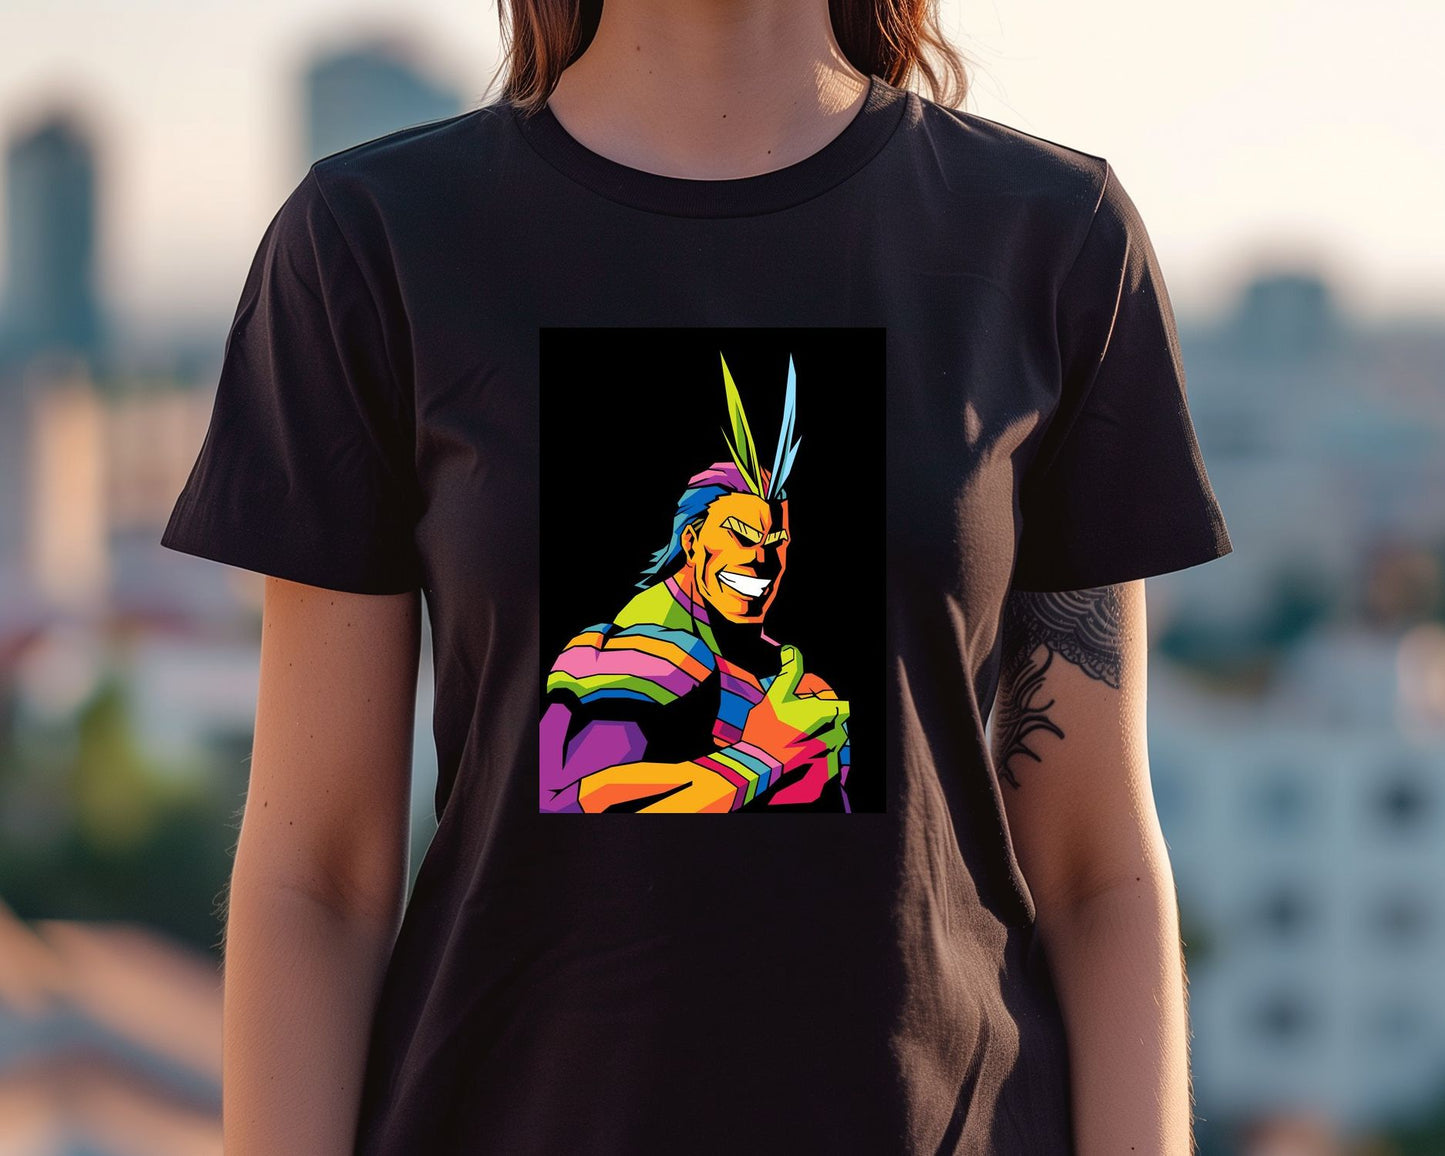 All Might - @ardianwpap